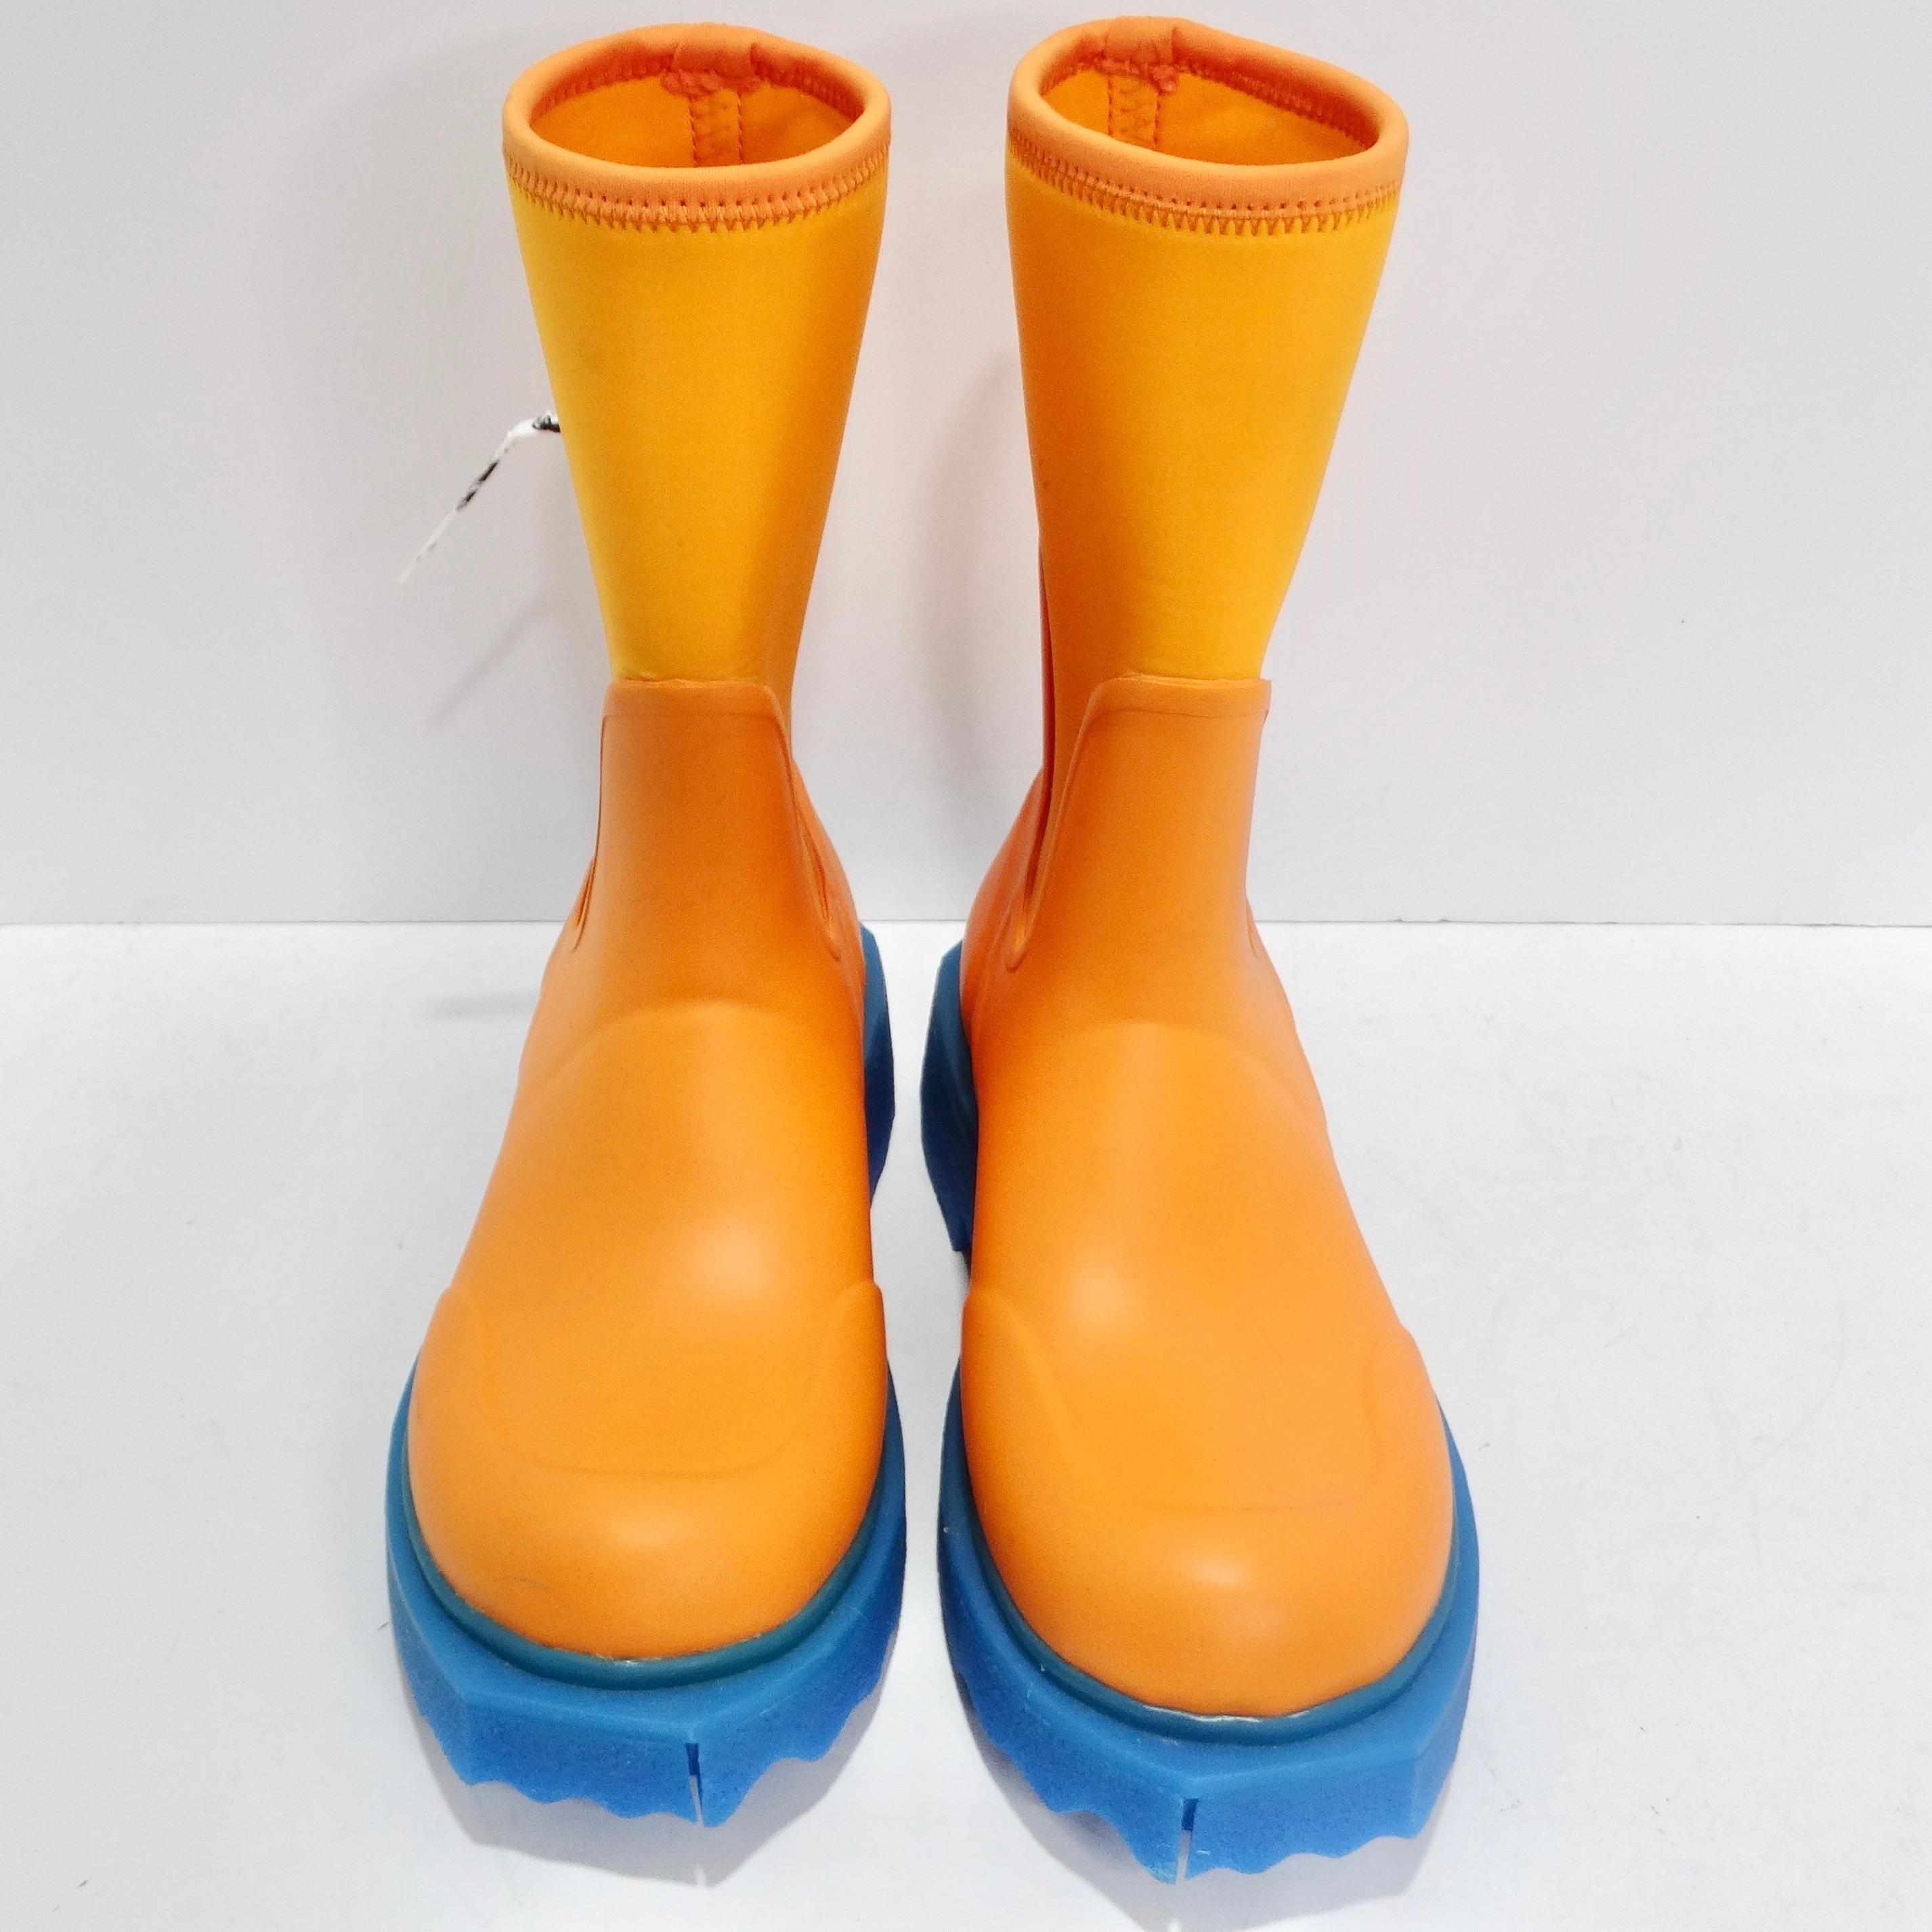 Get your hands on the Off-White Orange & Blue Rubber Boots—an edgy and playful addition to your footwear collection that defies convention and brings a burst of energy to rainy days. The boots feature a striking orange hue, instantly capturing